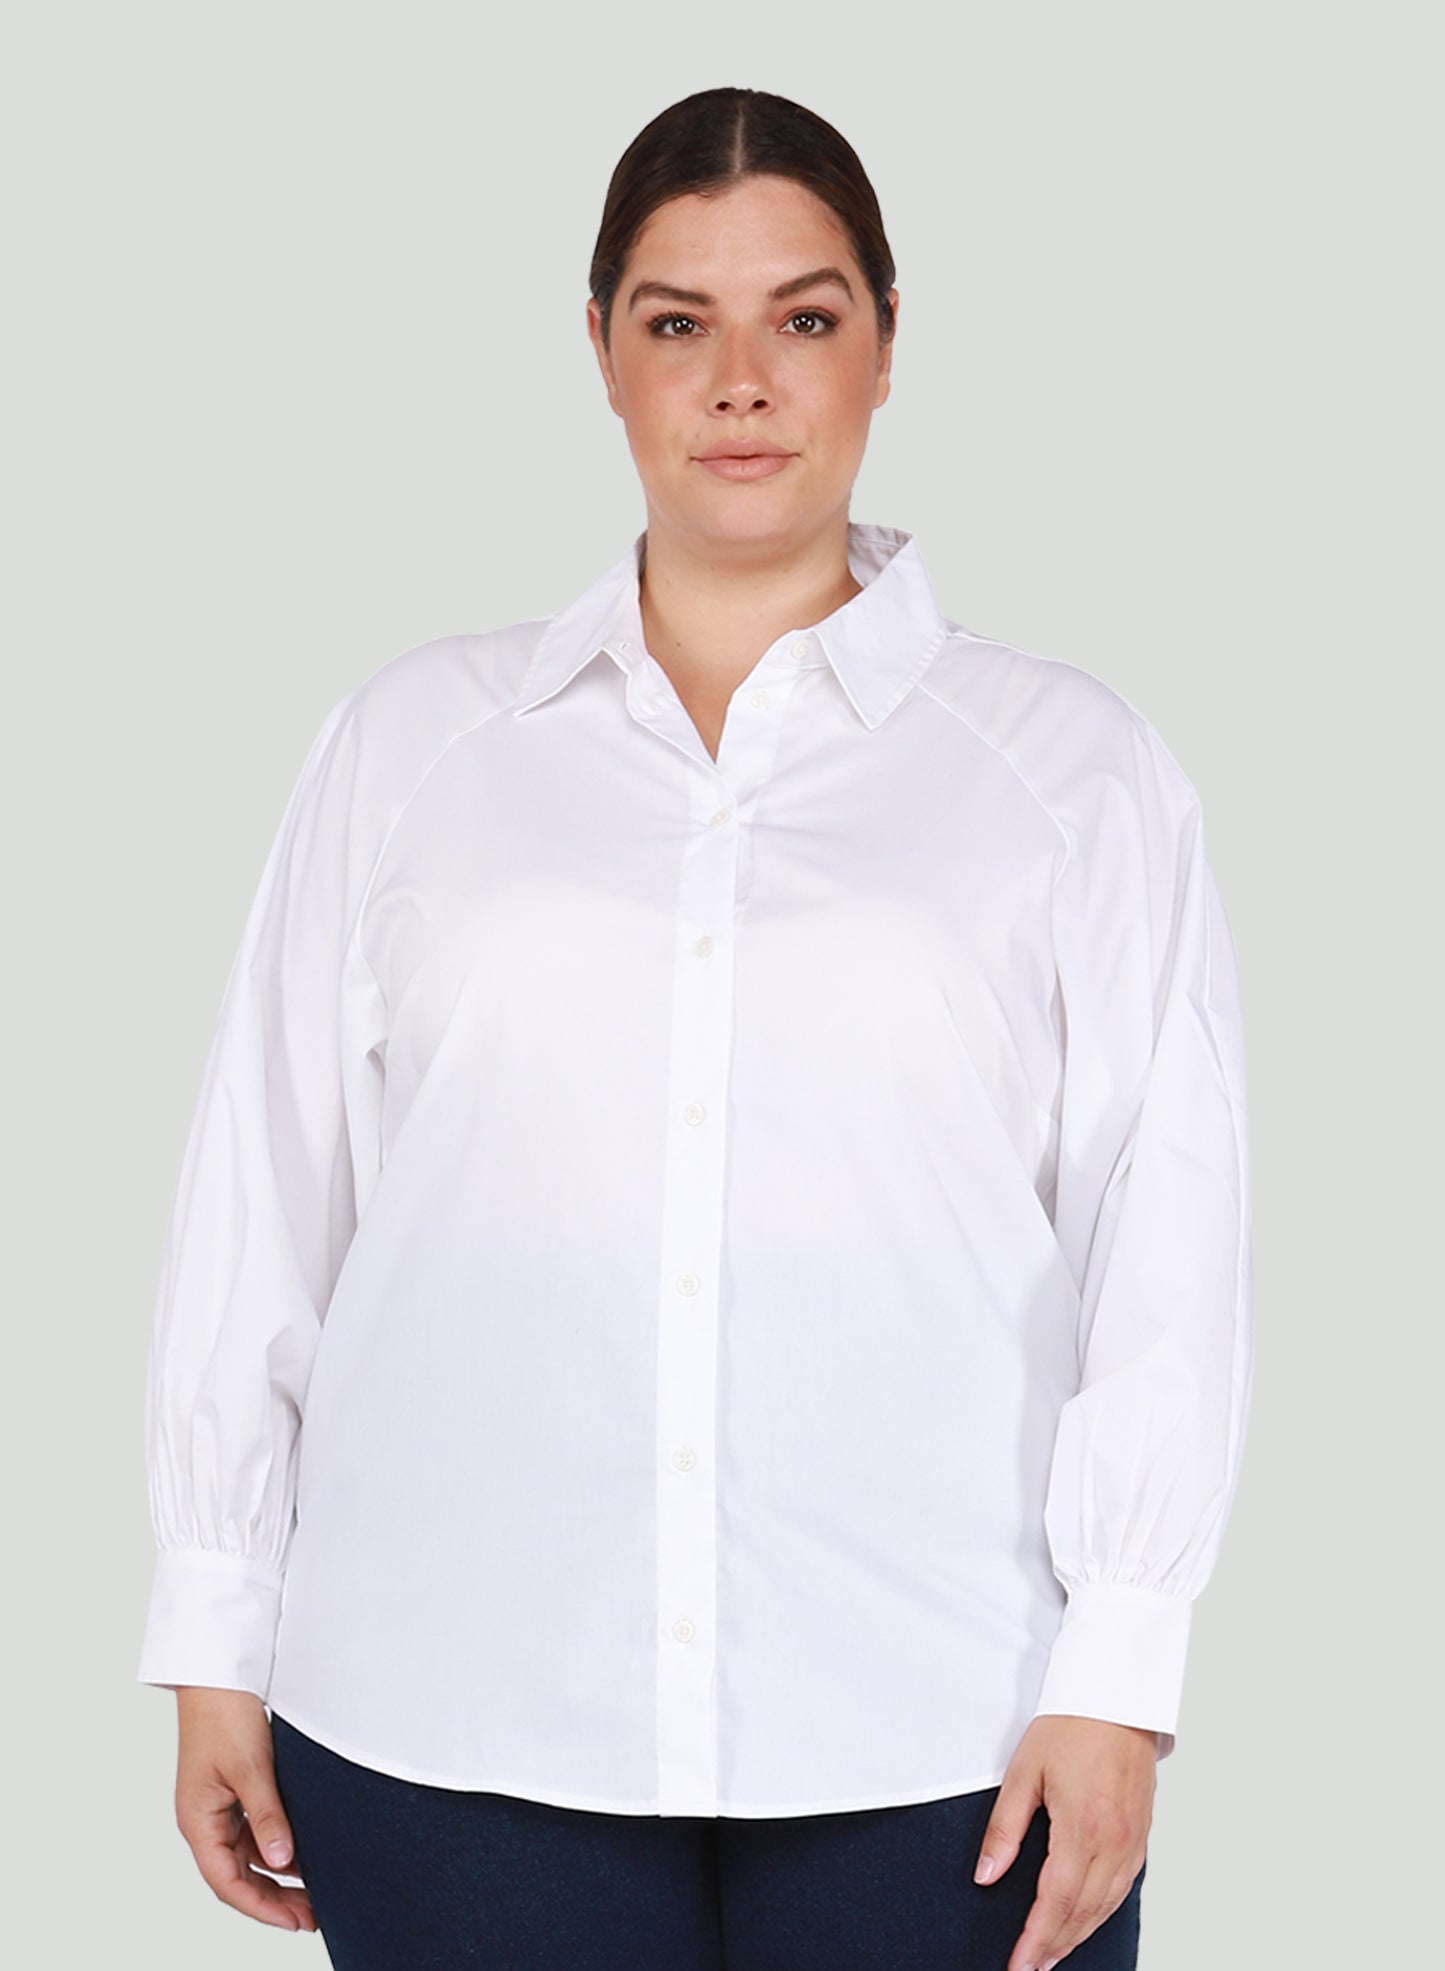 Not So Classic White Button Up Shirt